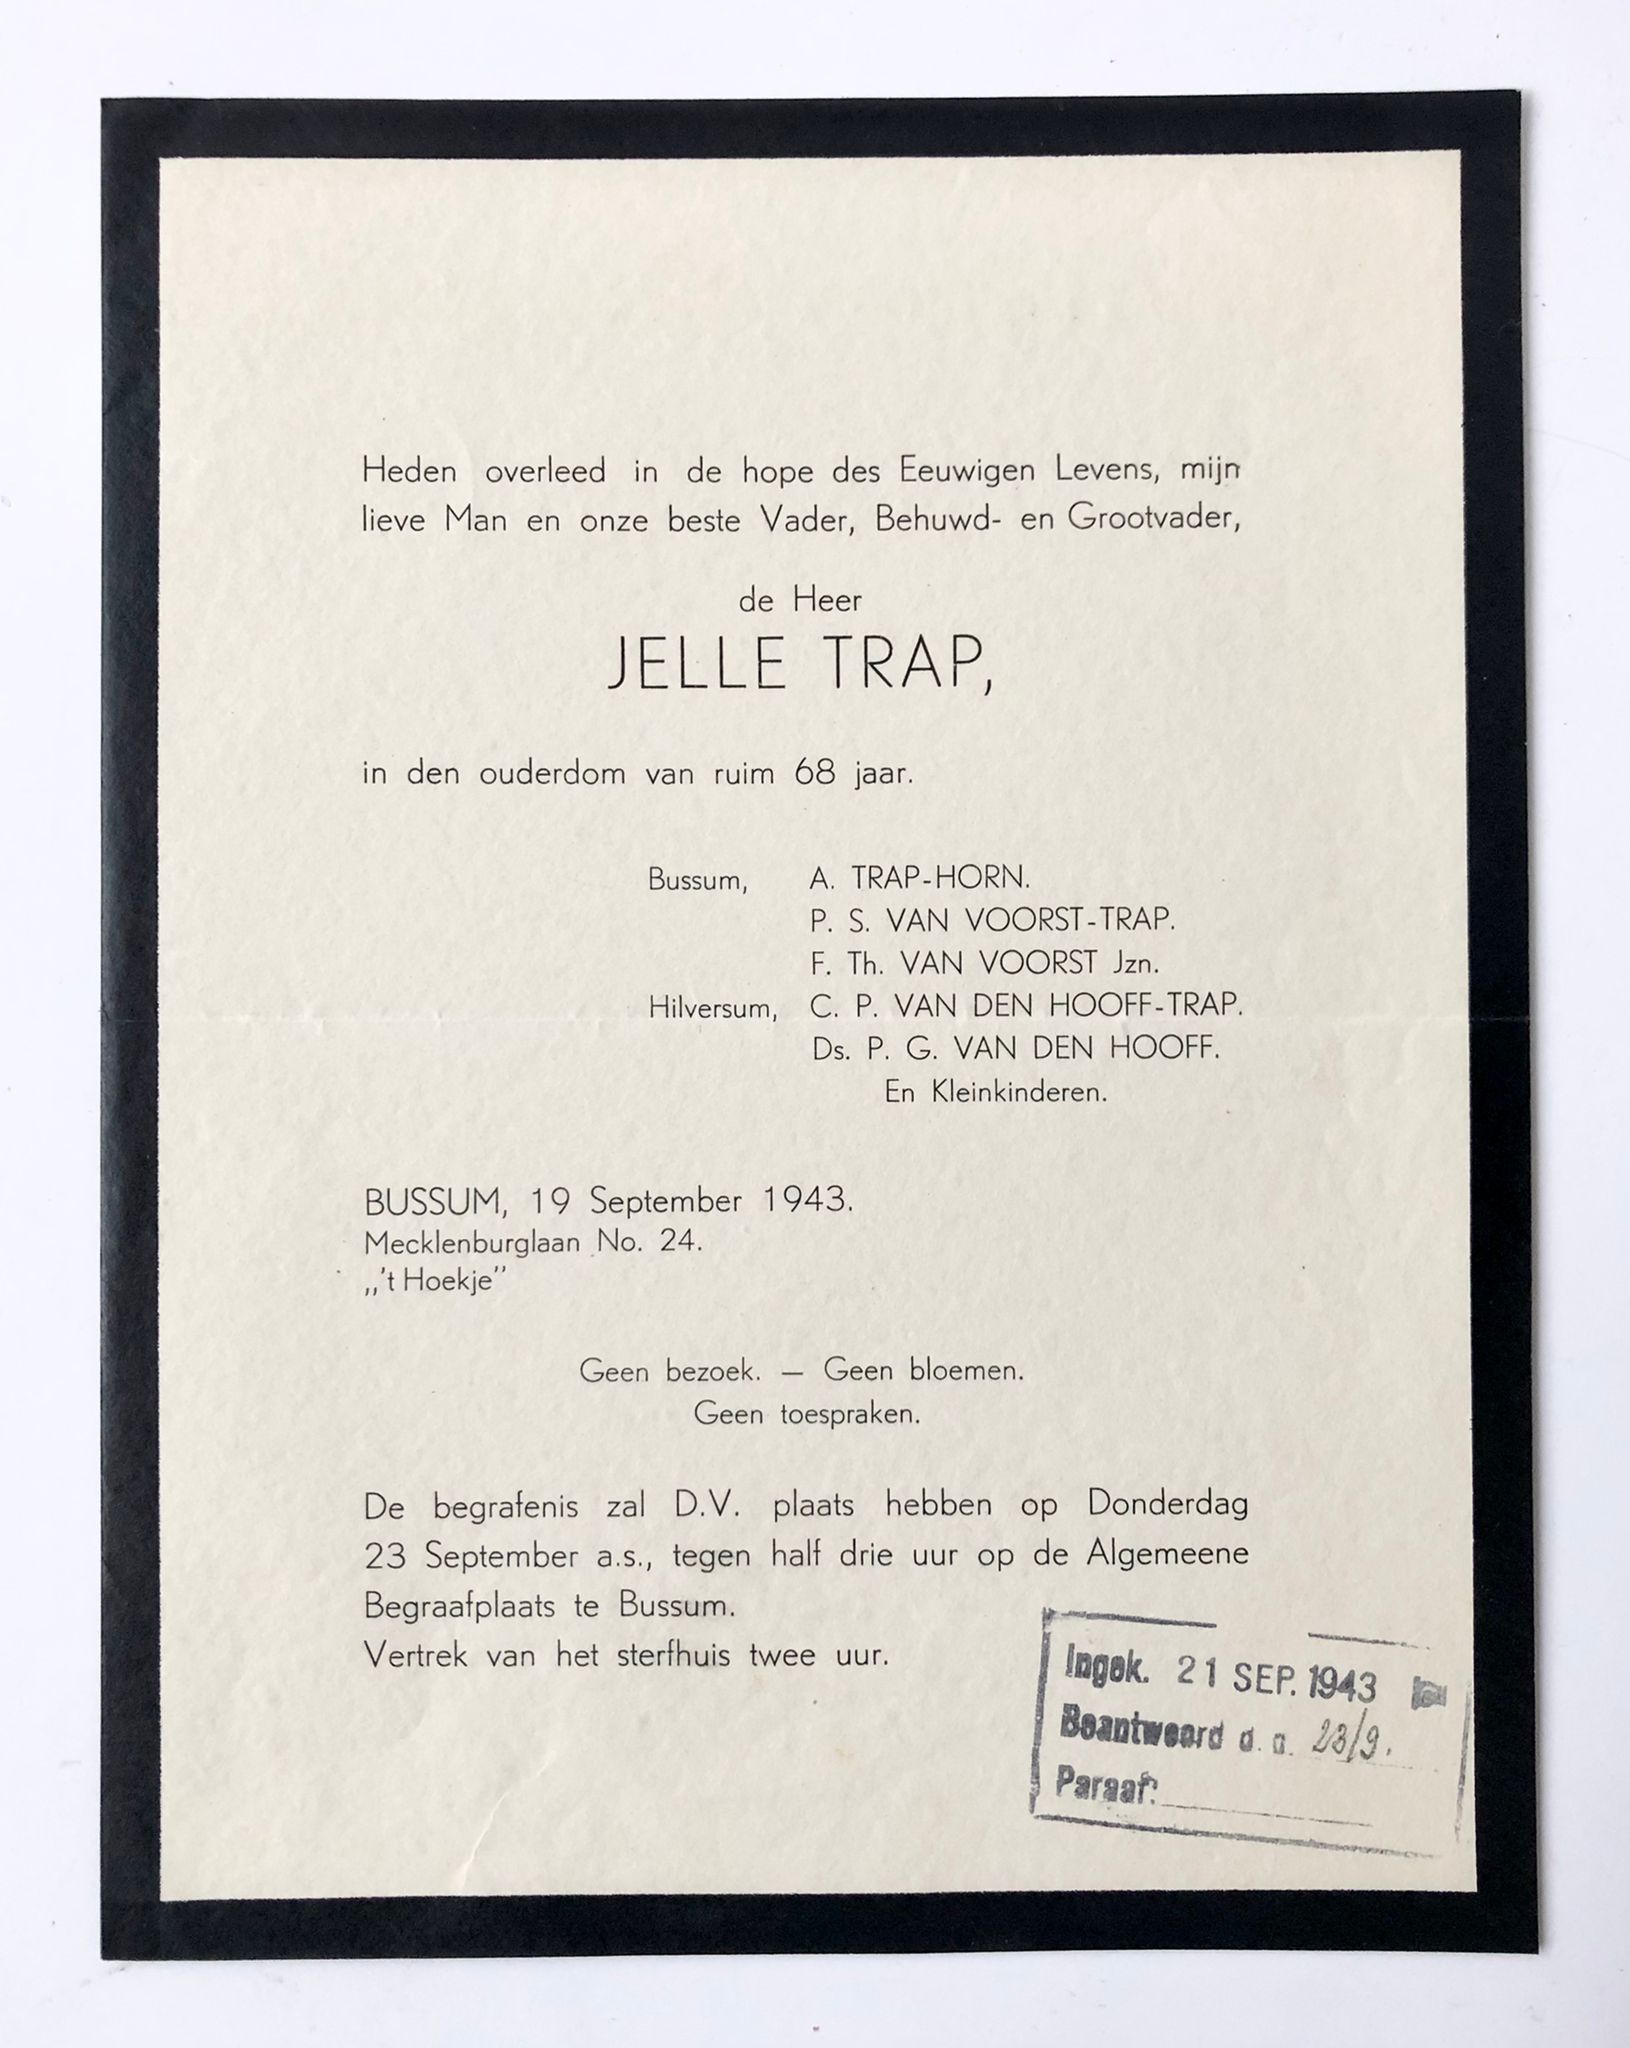 [Printed death announcement 1943] Printed death announcement for Jelle Trap and thank you note, 2 pp. Bussum, 1943.